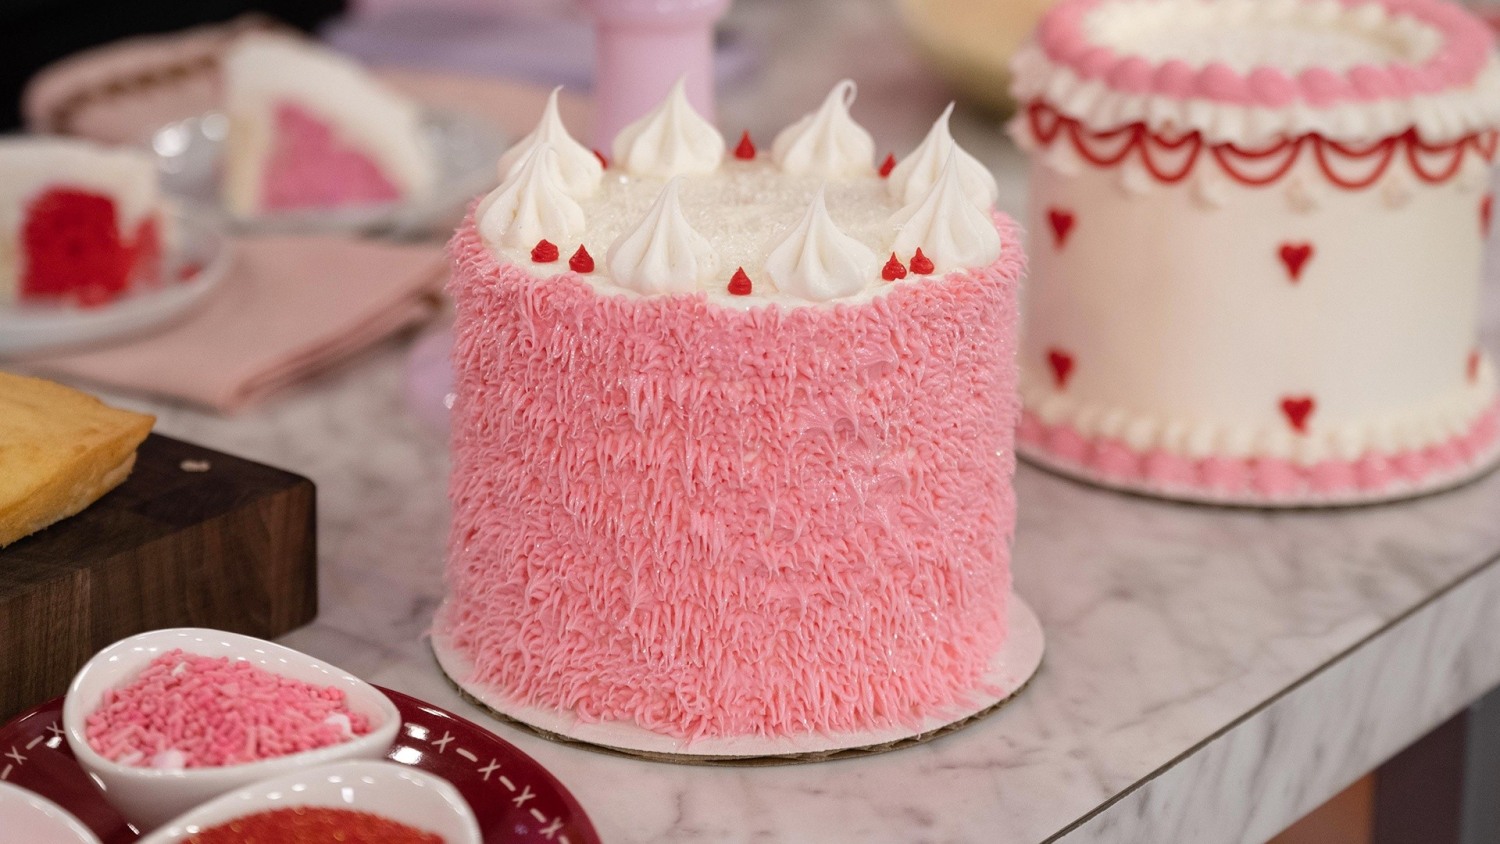 20 Creative Valentine's Day Cake Ideas to Bake This February - Let's Eat  Cake-mncb.edu.vn